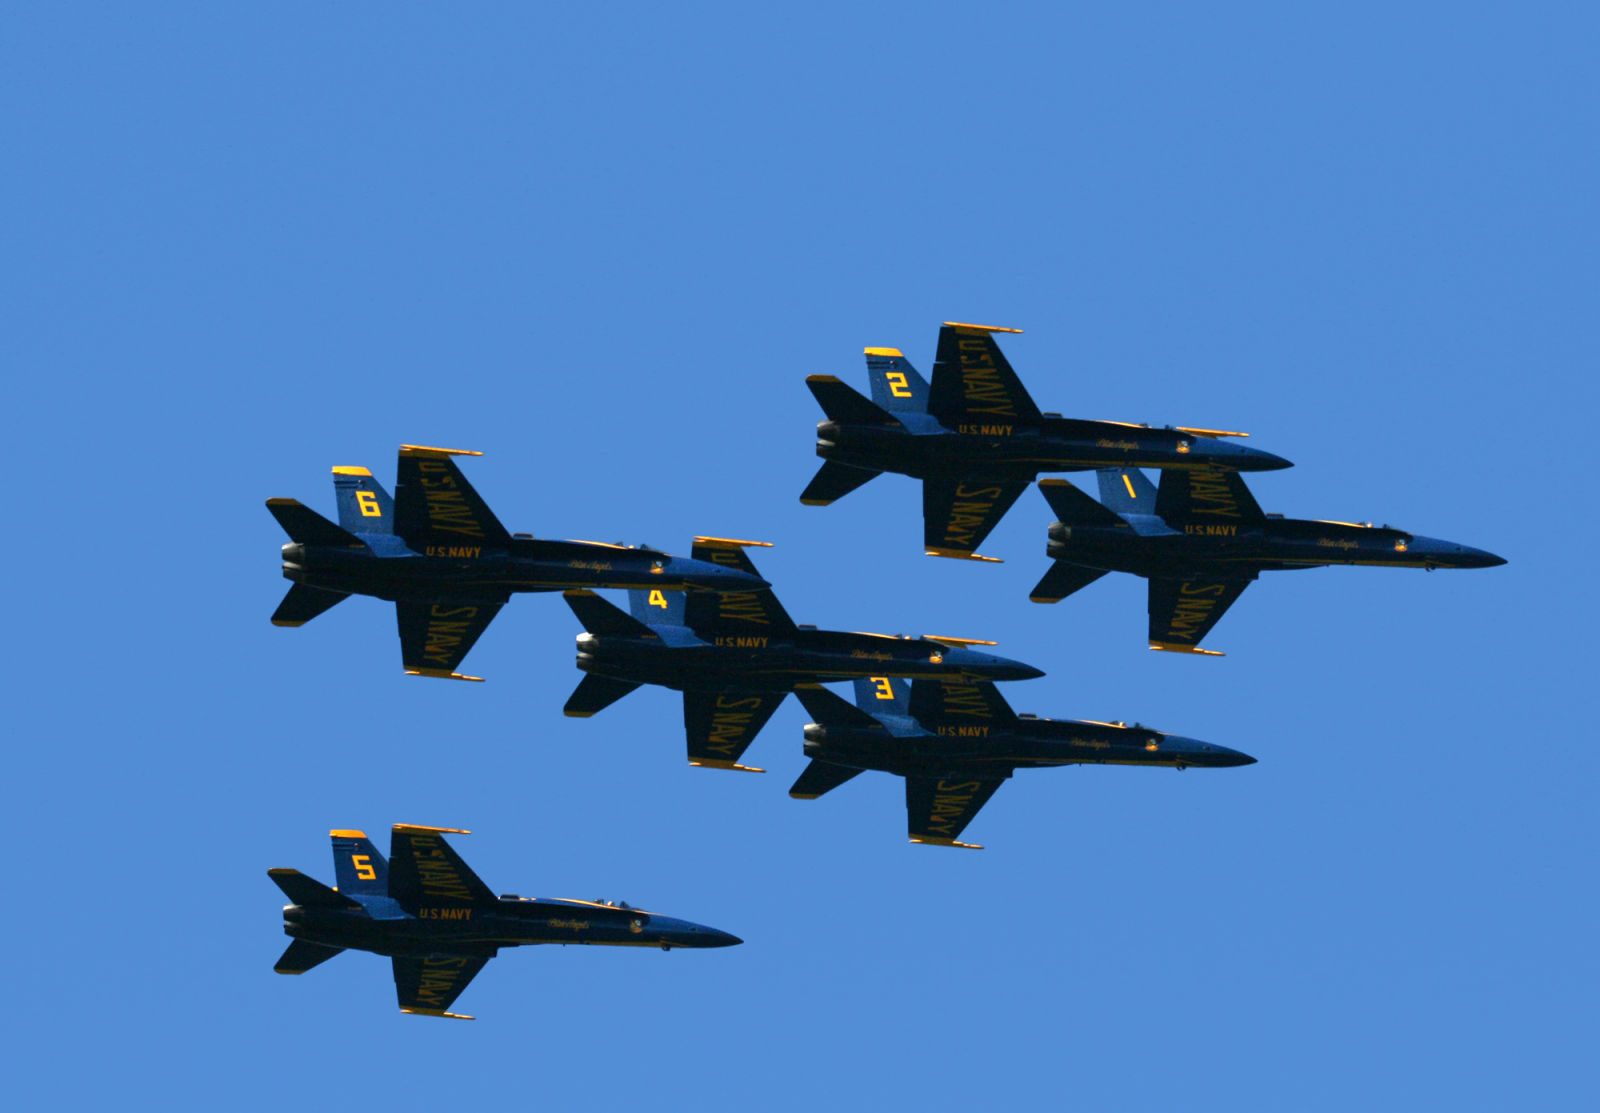 The Blue Angels have flown F/A-18A, C and two-seat D models since 1986, and will be transitioning to F/A-18E Super Hornets in 2021